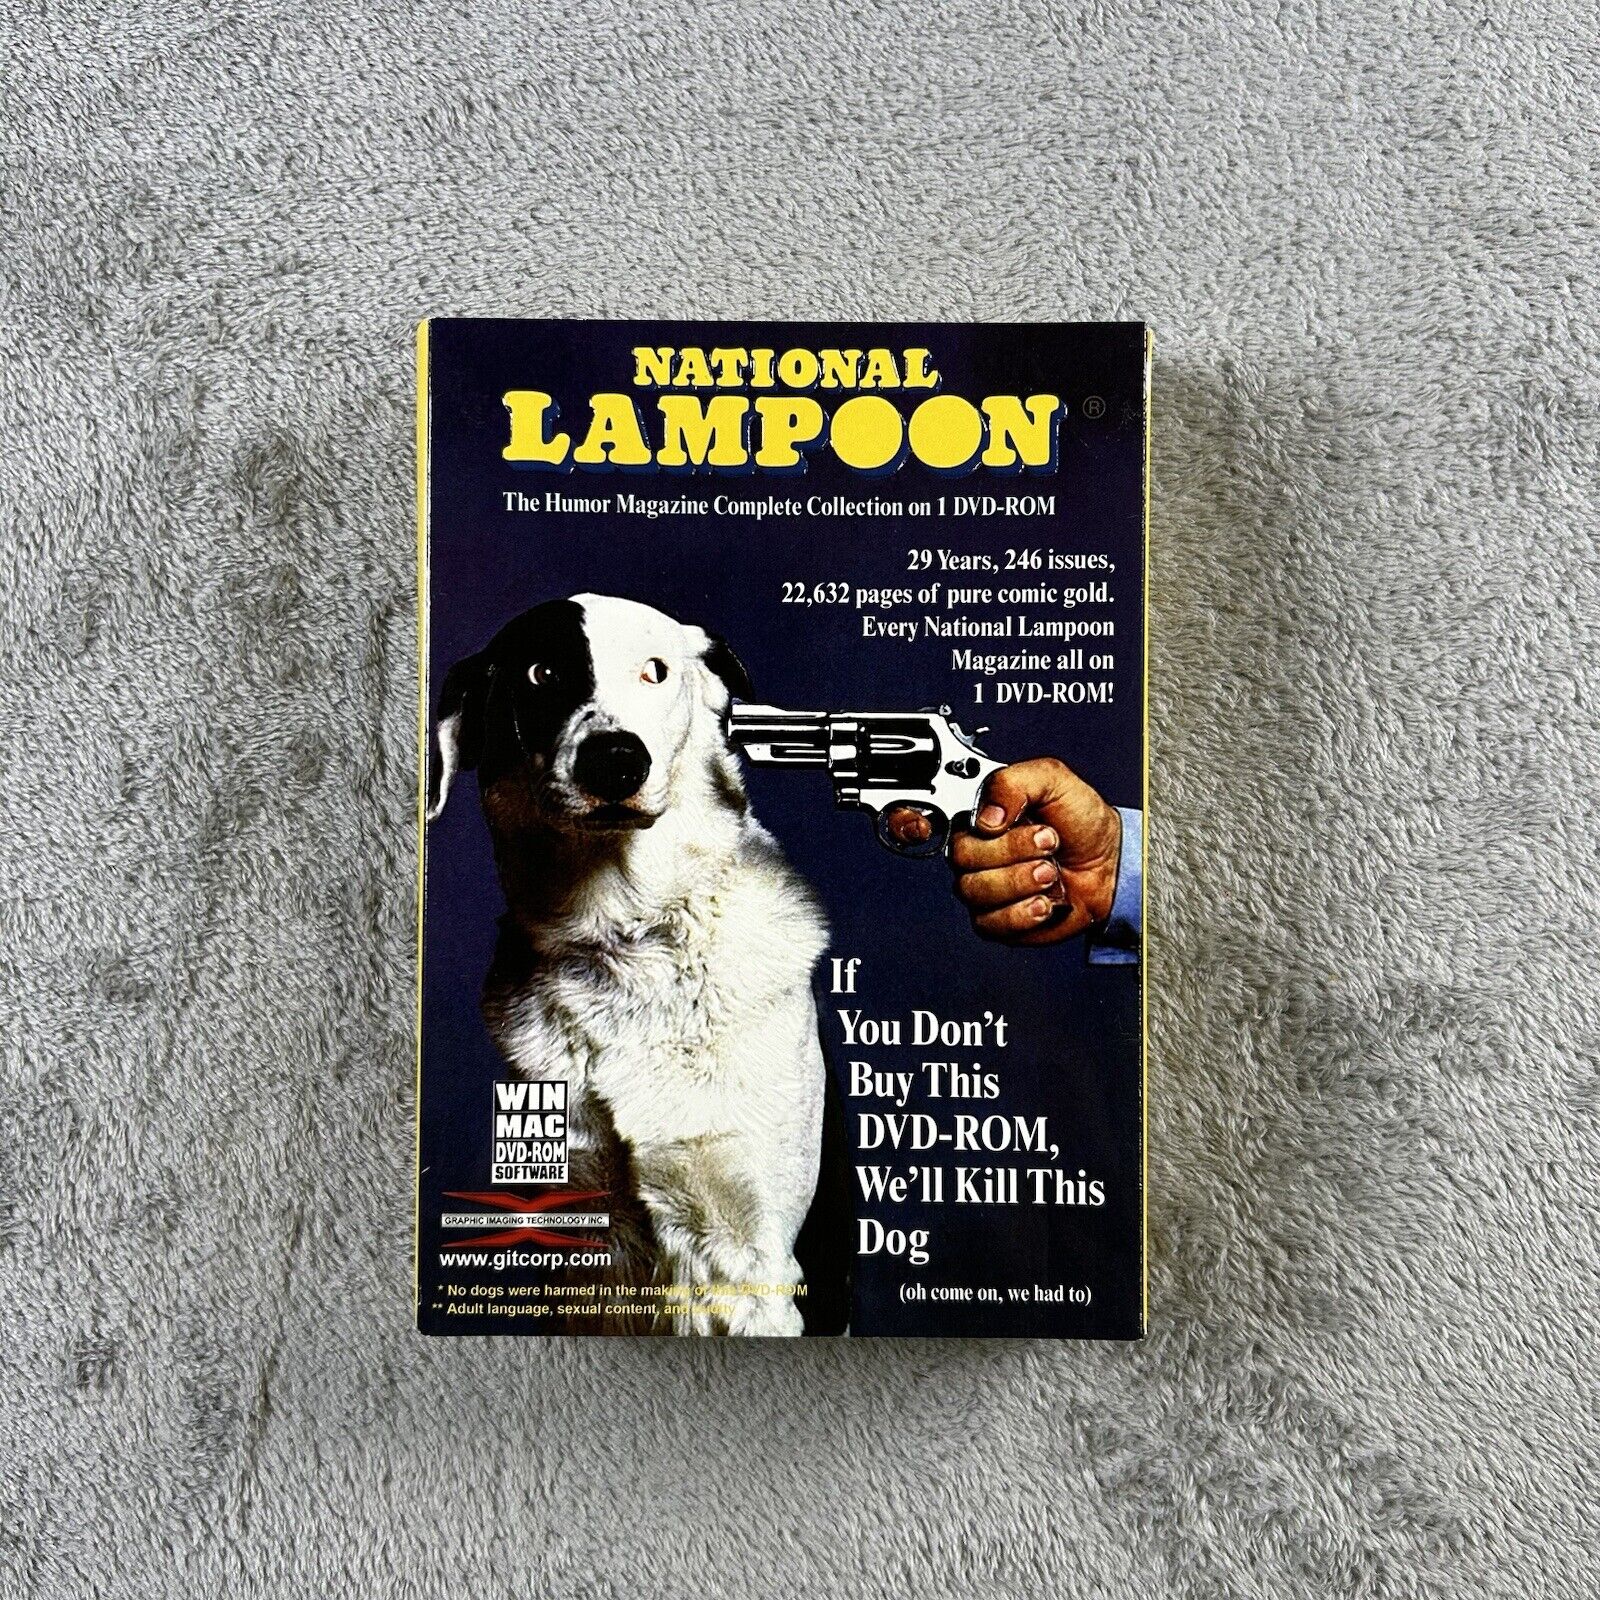 NEW National Lampoon DVD-Rom Complete 246 Issue Digital Magazine Collection RARE